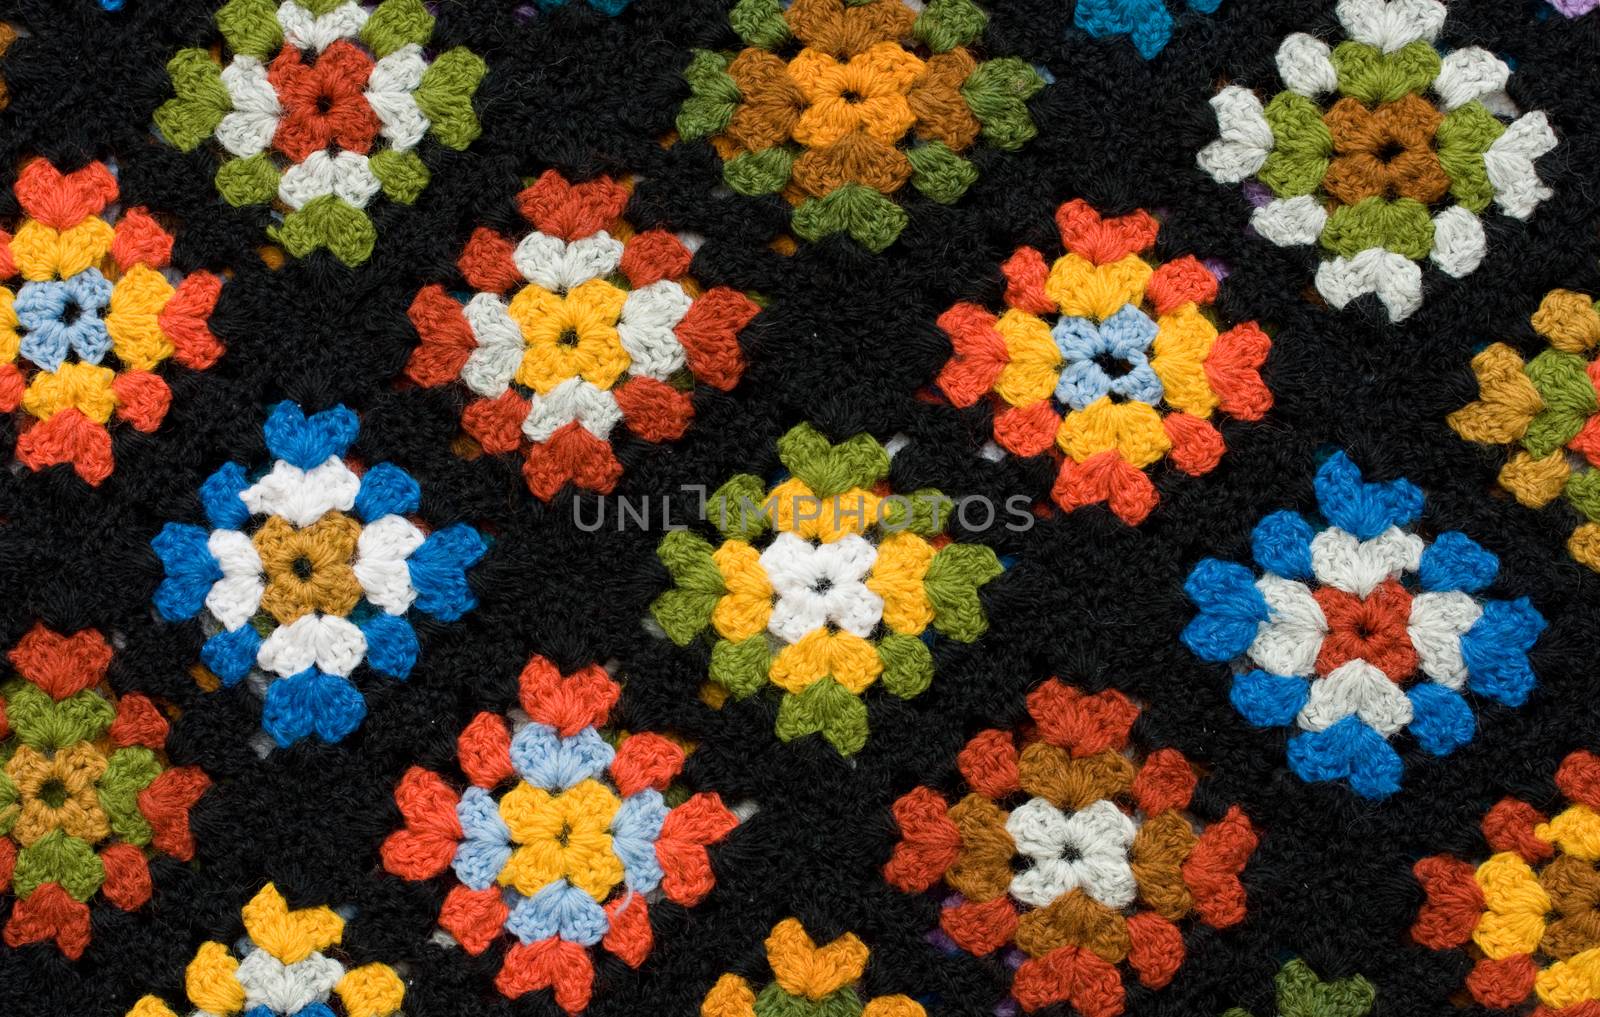 Retro homemade crochet blanket made from Granny Squares by kavring